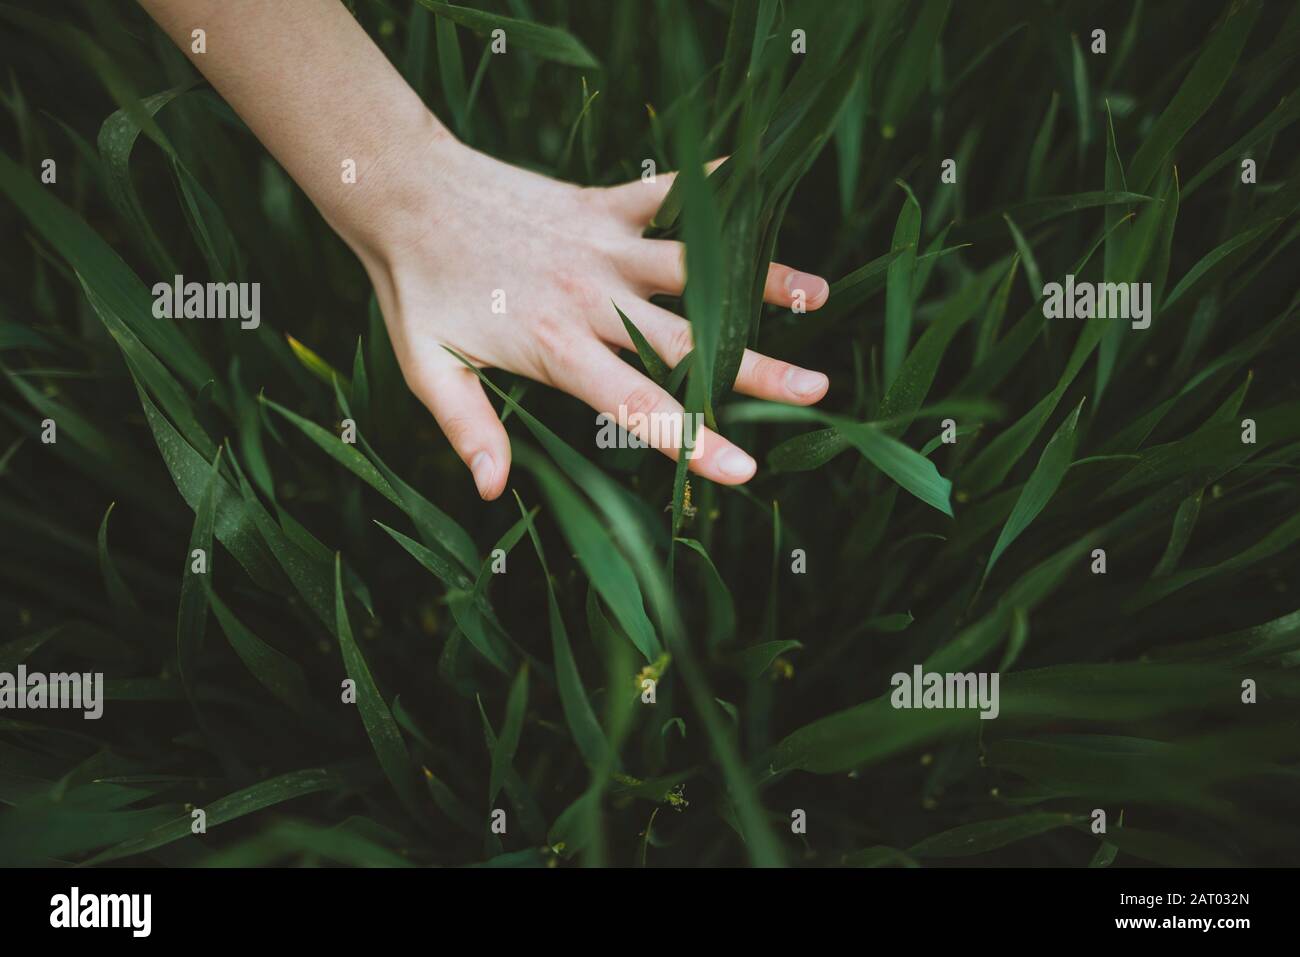 Woman's hand touching grass Banque D'Images